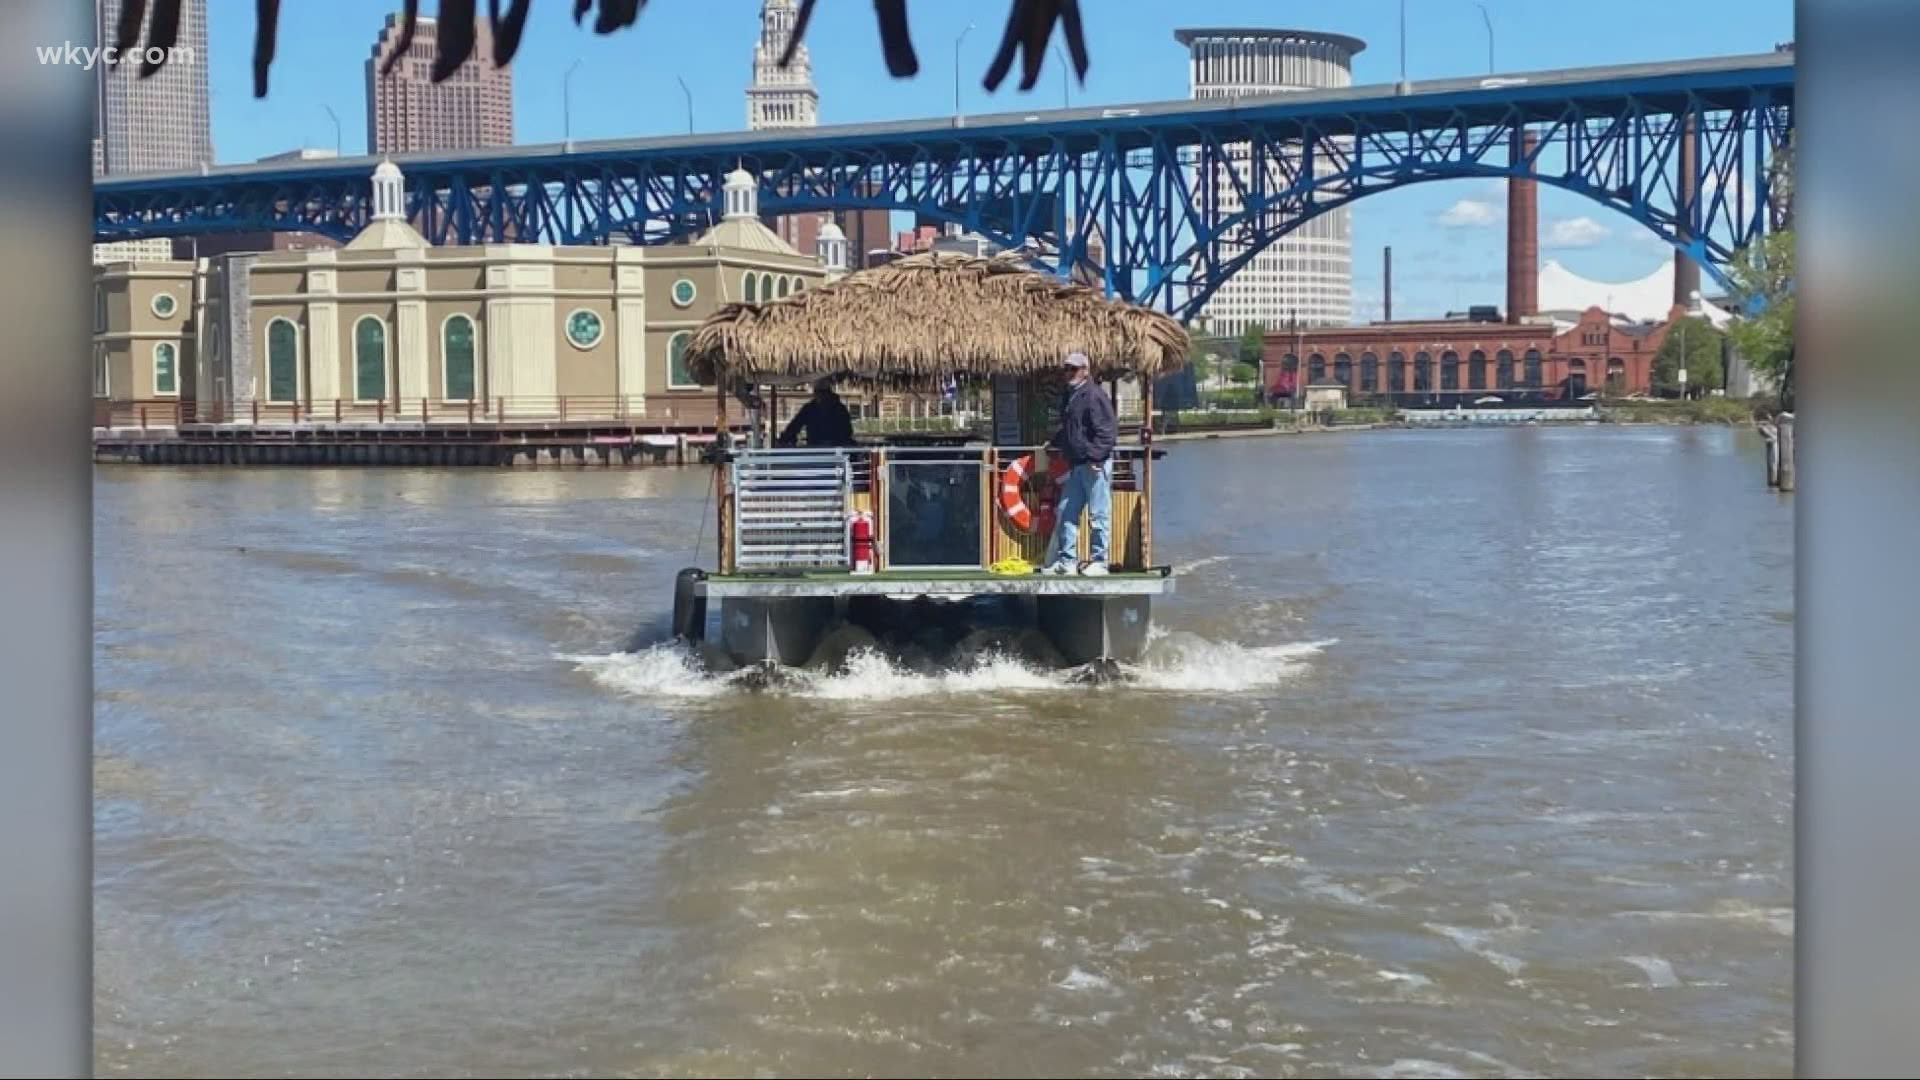 CLE Tiki Barge is the perfect summer activity!